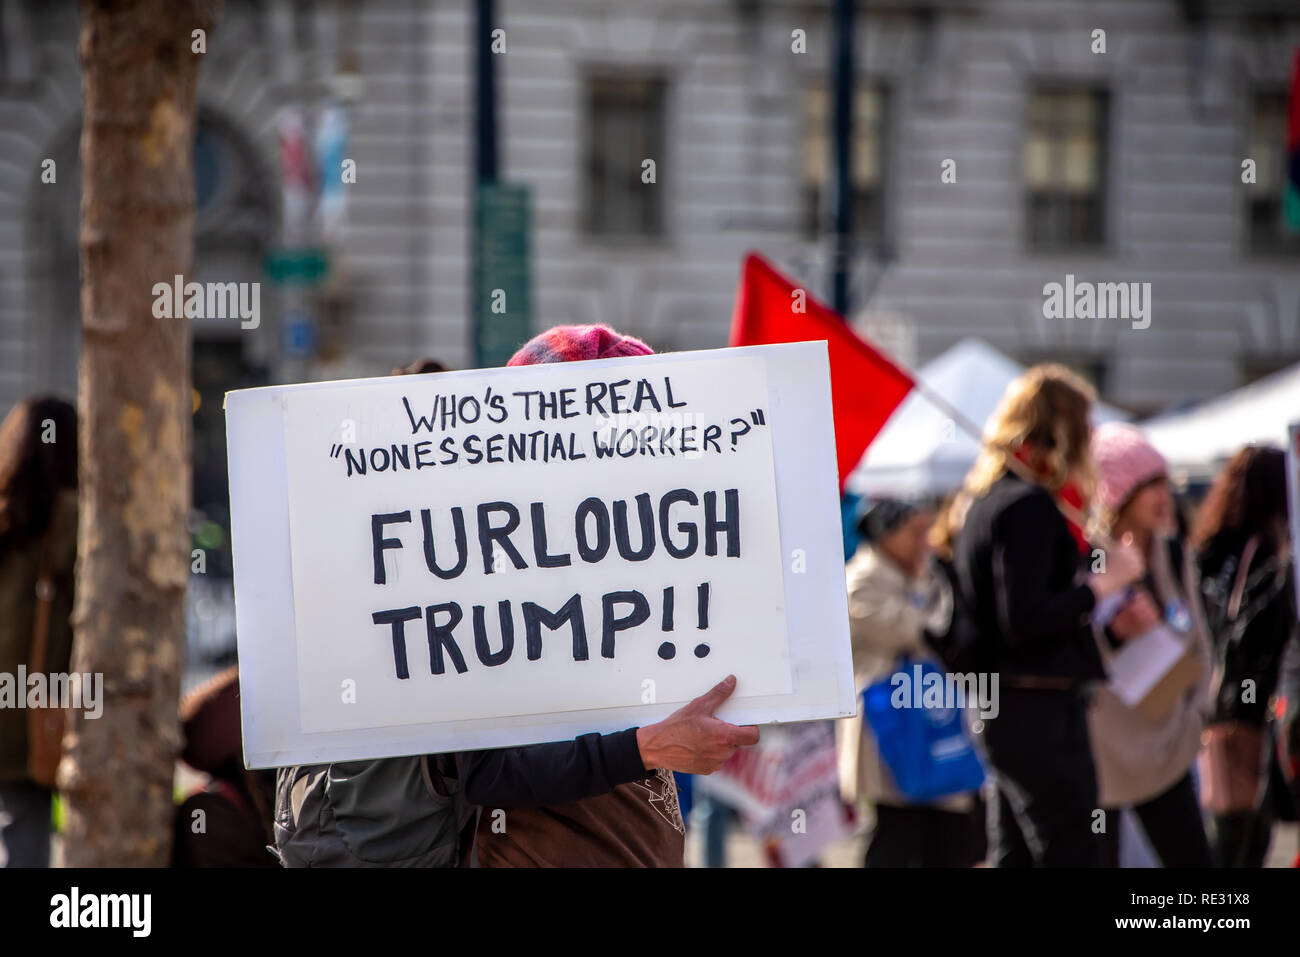 San Francisco, USA. 19th January, 2019. The Women's March San Francisco begins with a rally at Civic Center Plaza in front of City Hall. A protester carries a sign through the plaza questioning, 'Who's the real 'nonessential worker'? Furlough Trump!' Credit: Shelly Rivoli/Alamy Live News Stock Photo